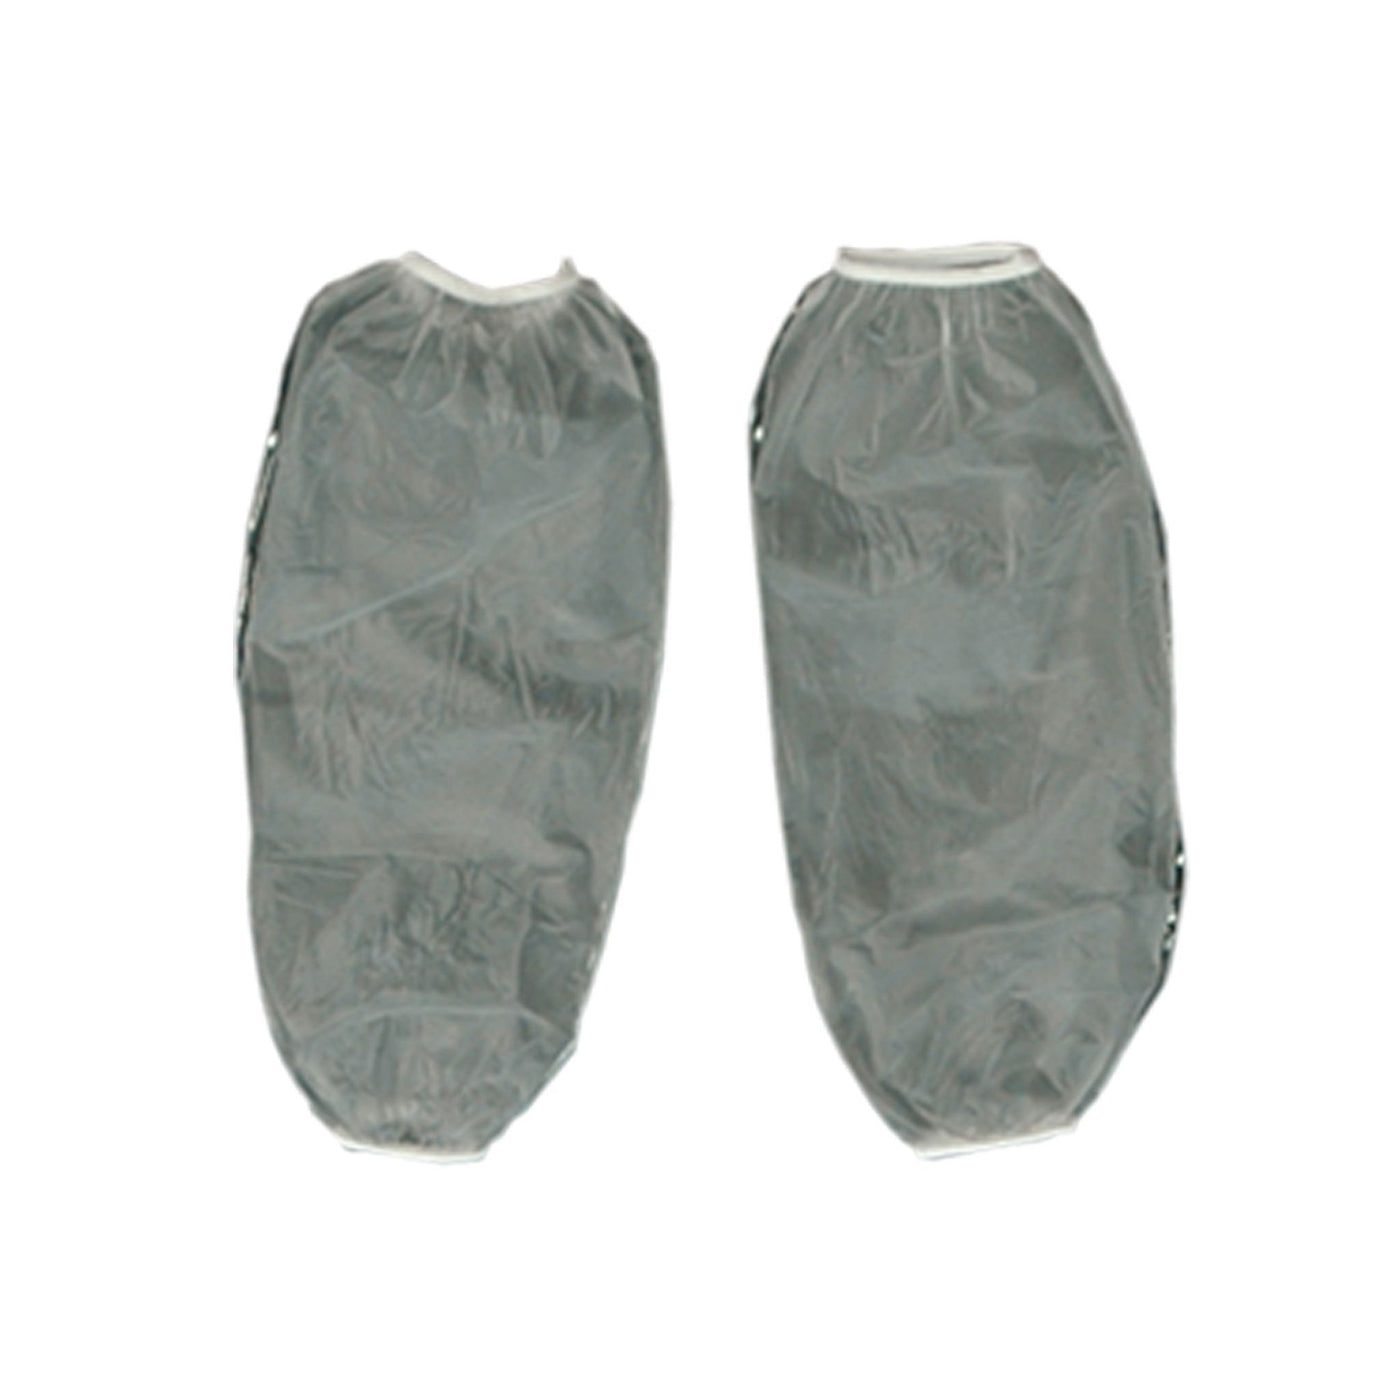 Body Bags & Mortuary Undergarments - Mortech Manufacturing